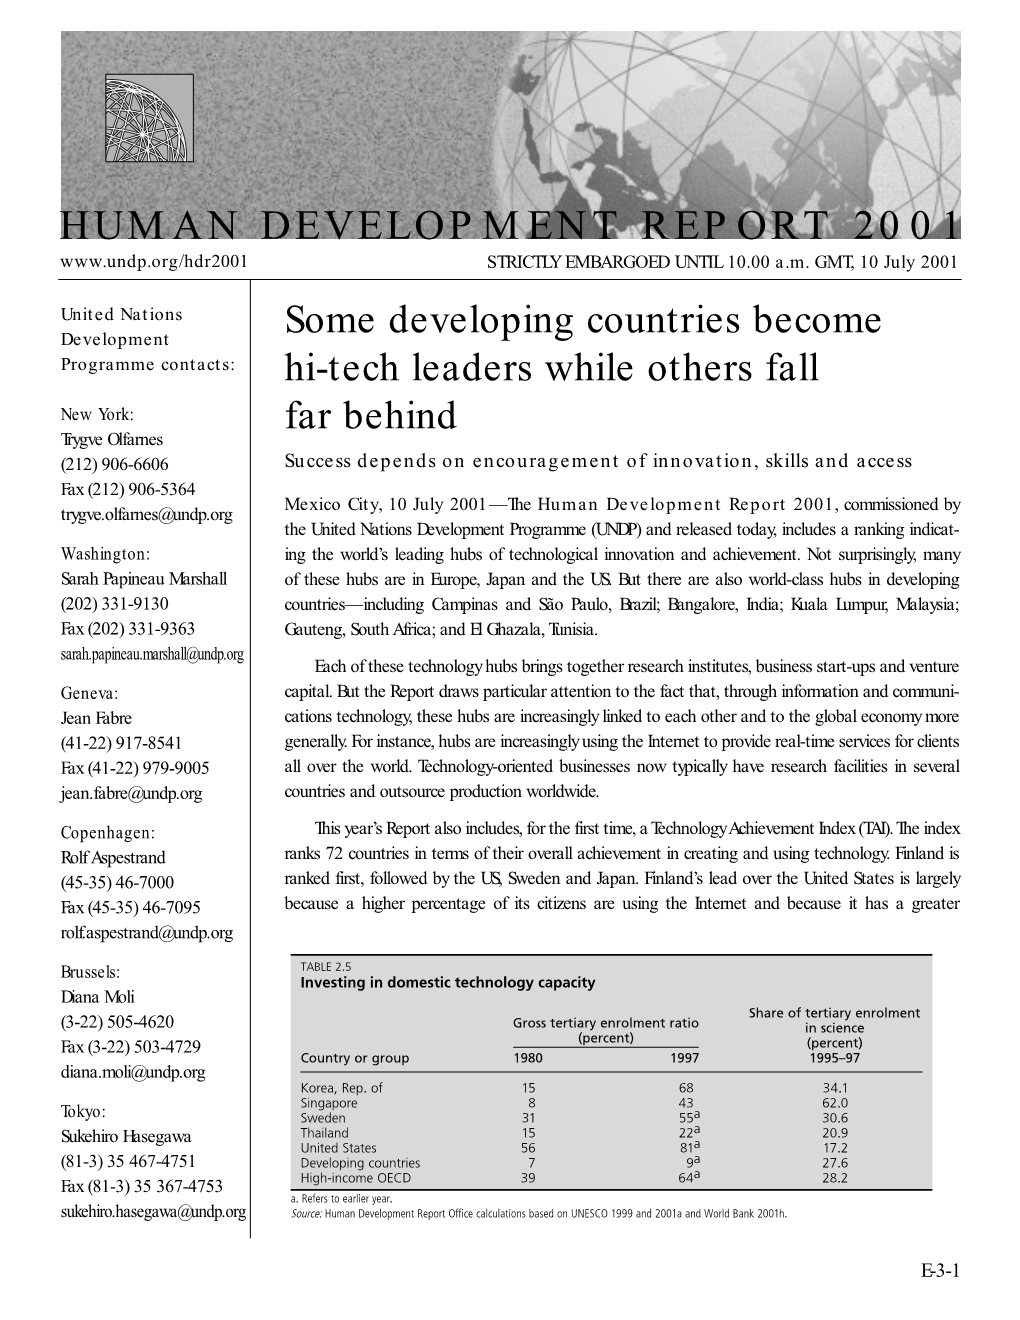 HUMAN DEVELOPMENT REPORT 2001 STRICTLY EMBARGOED UNTIL 10.00 A.M